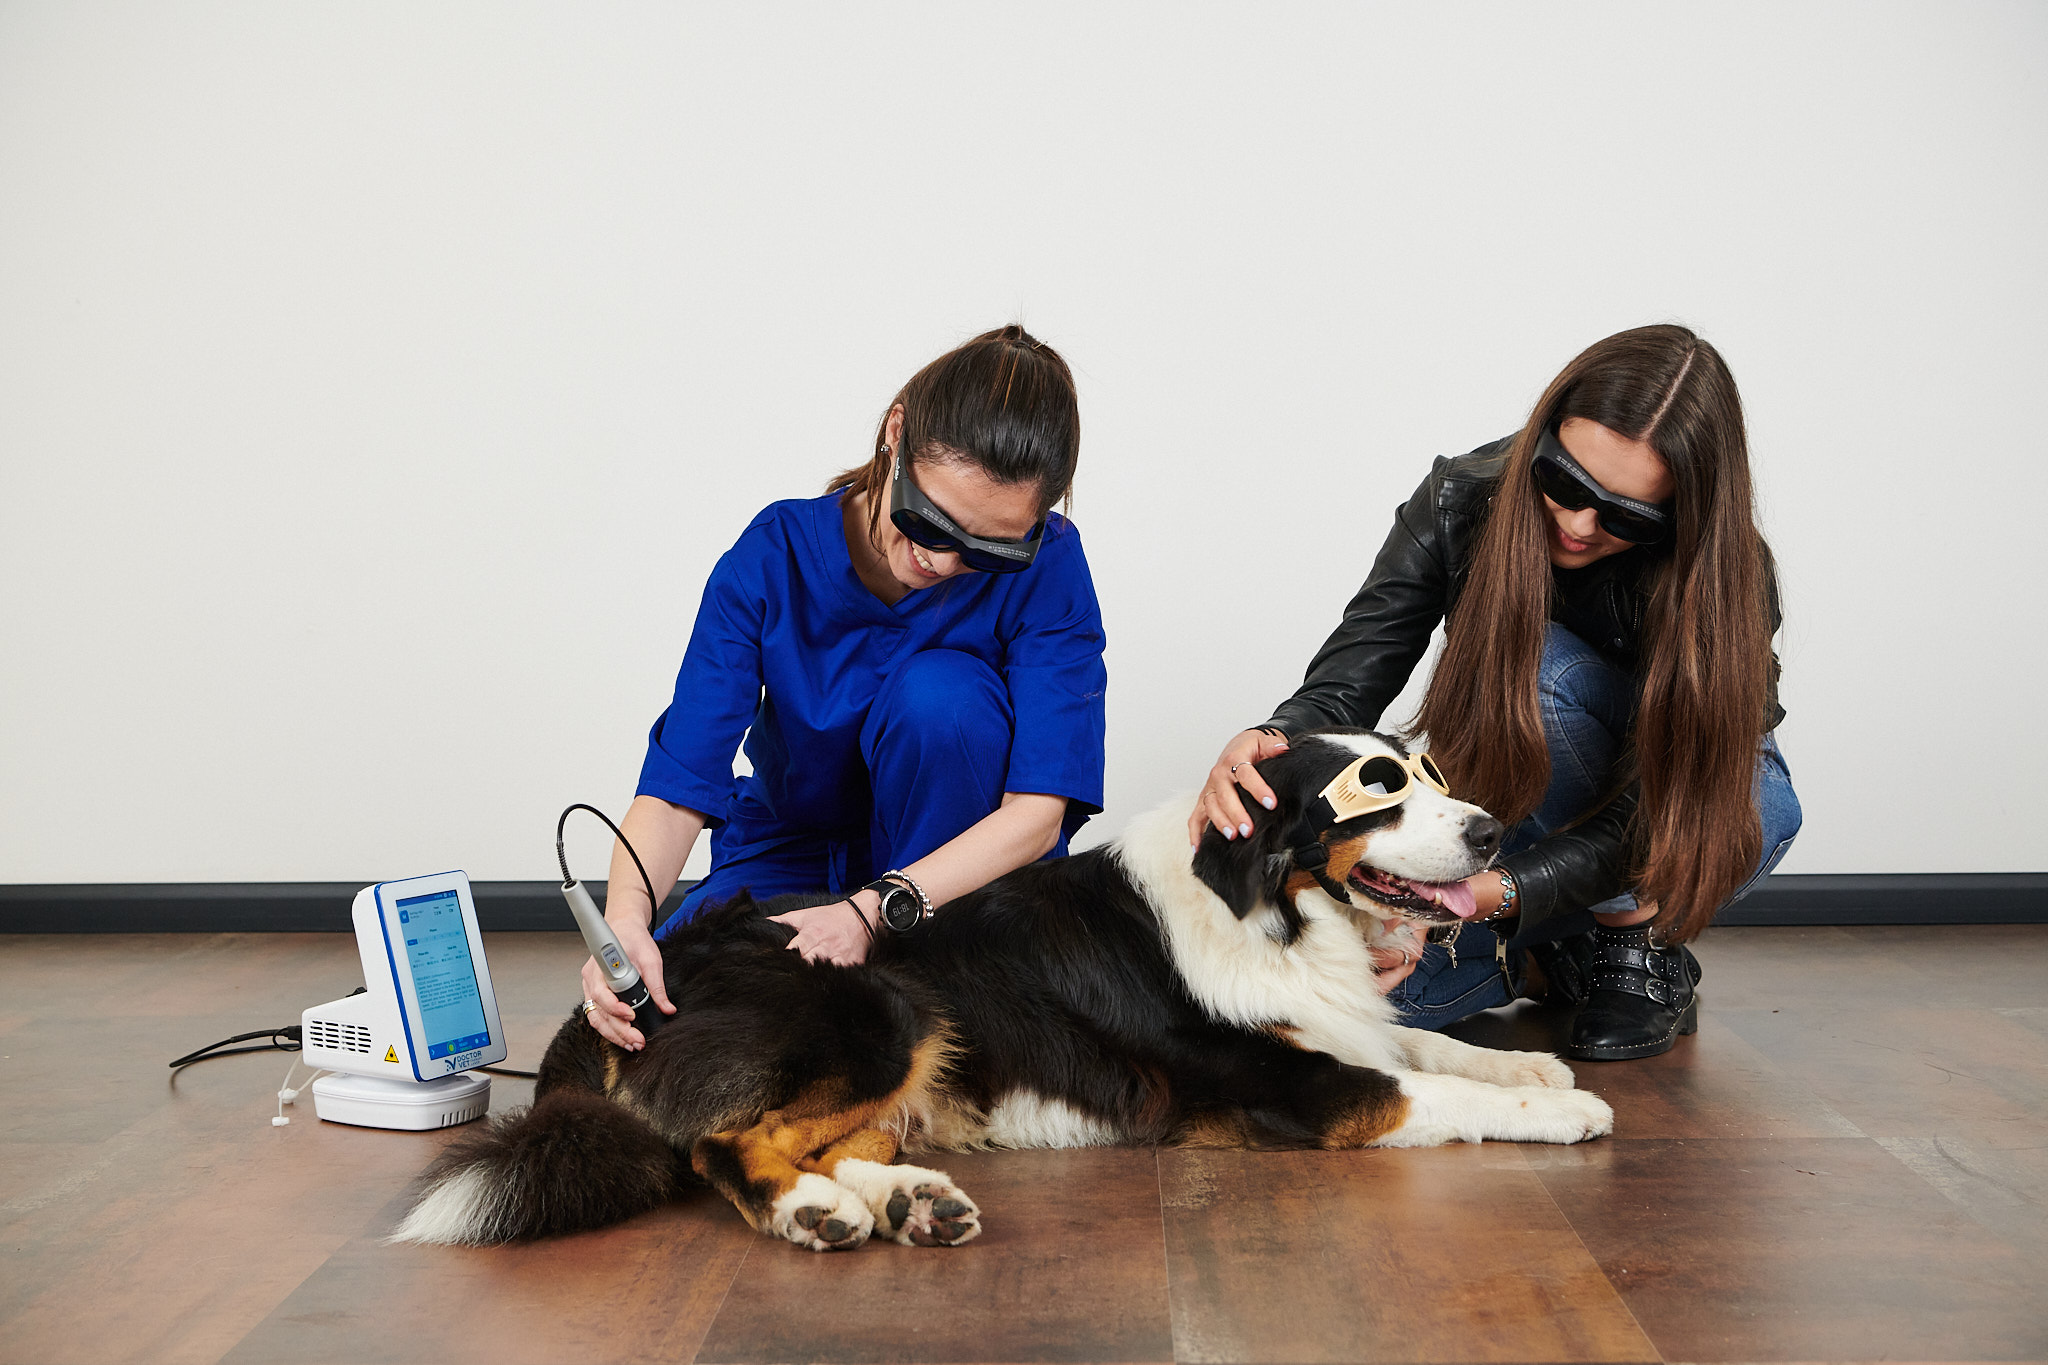 Studies on the power of laser therapy devices